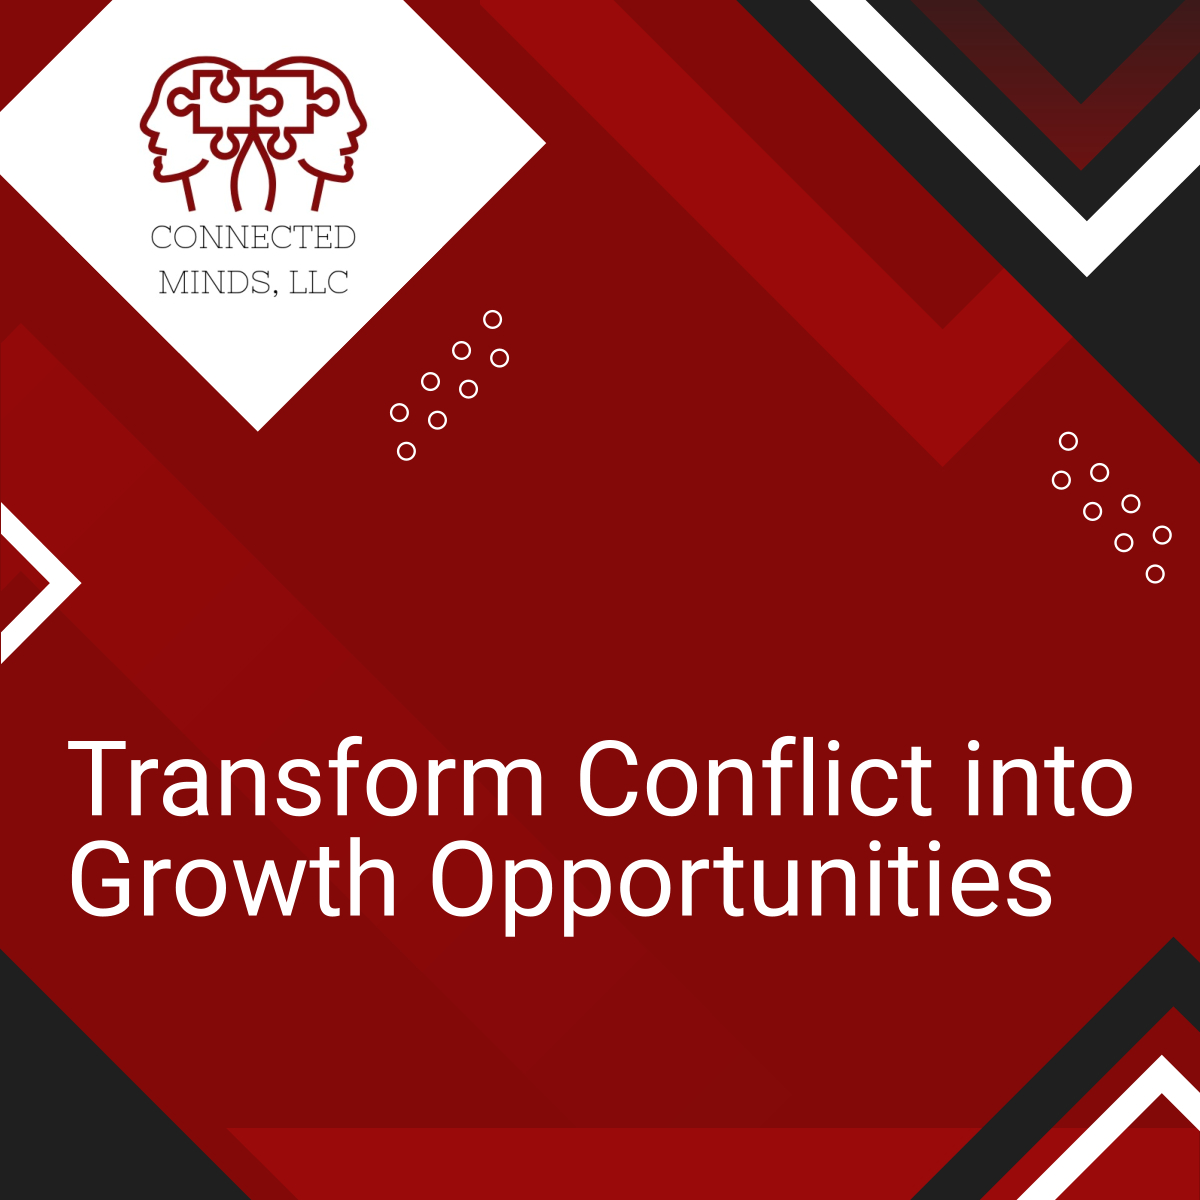 Encountering conflict can be daunting, but also an opportunity for growth. Delve into techniques that turn disputes into constructive conversations. With our guidance, harmonious coexistence is within reach.

#PsychiatricWellness #GrowthOpportunities #Conflict